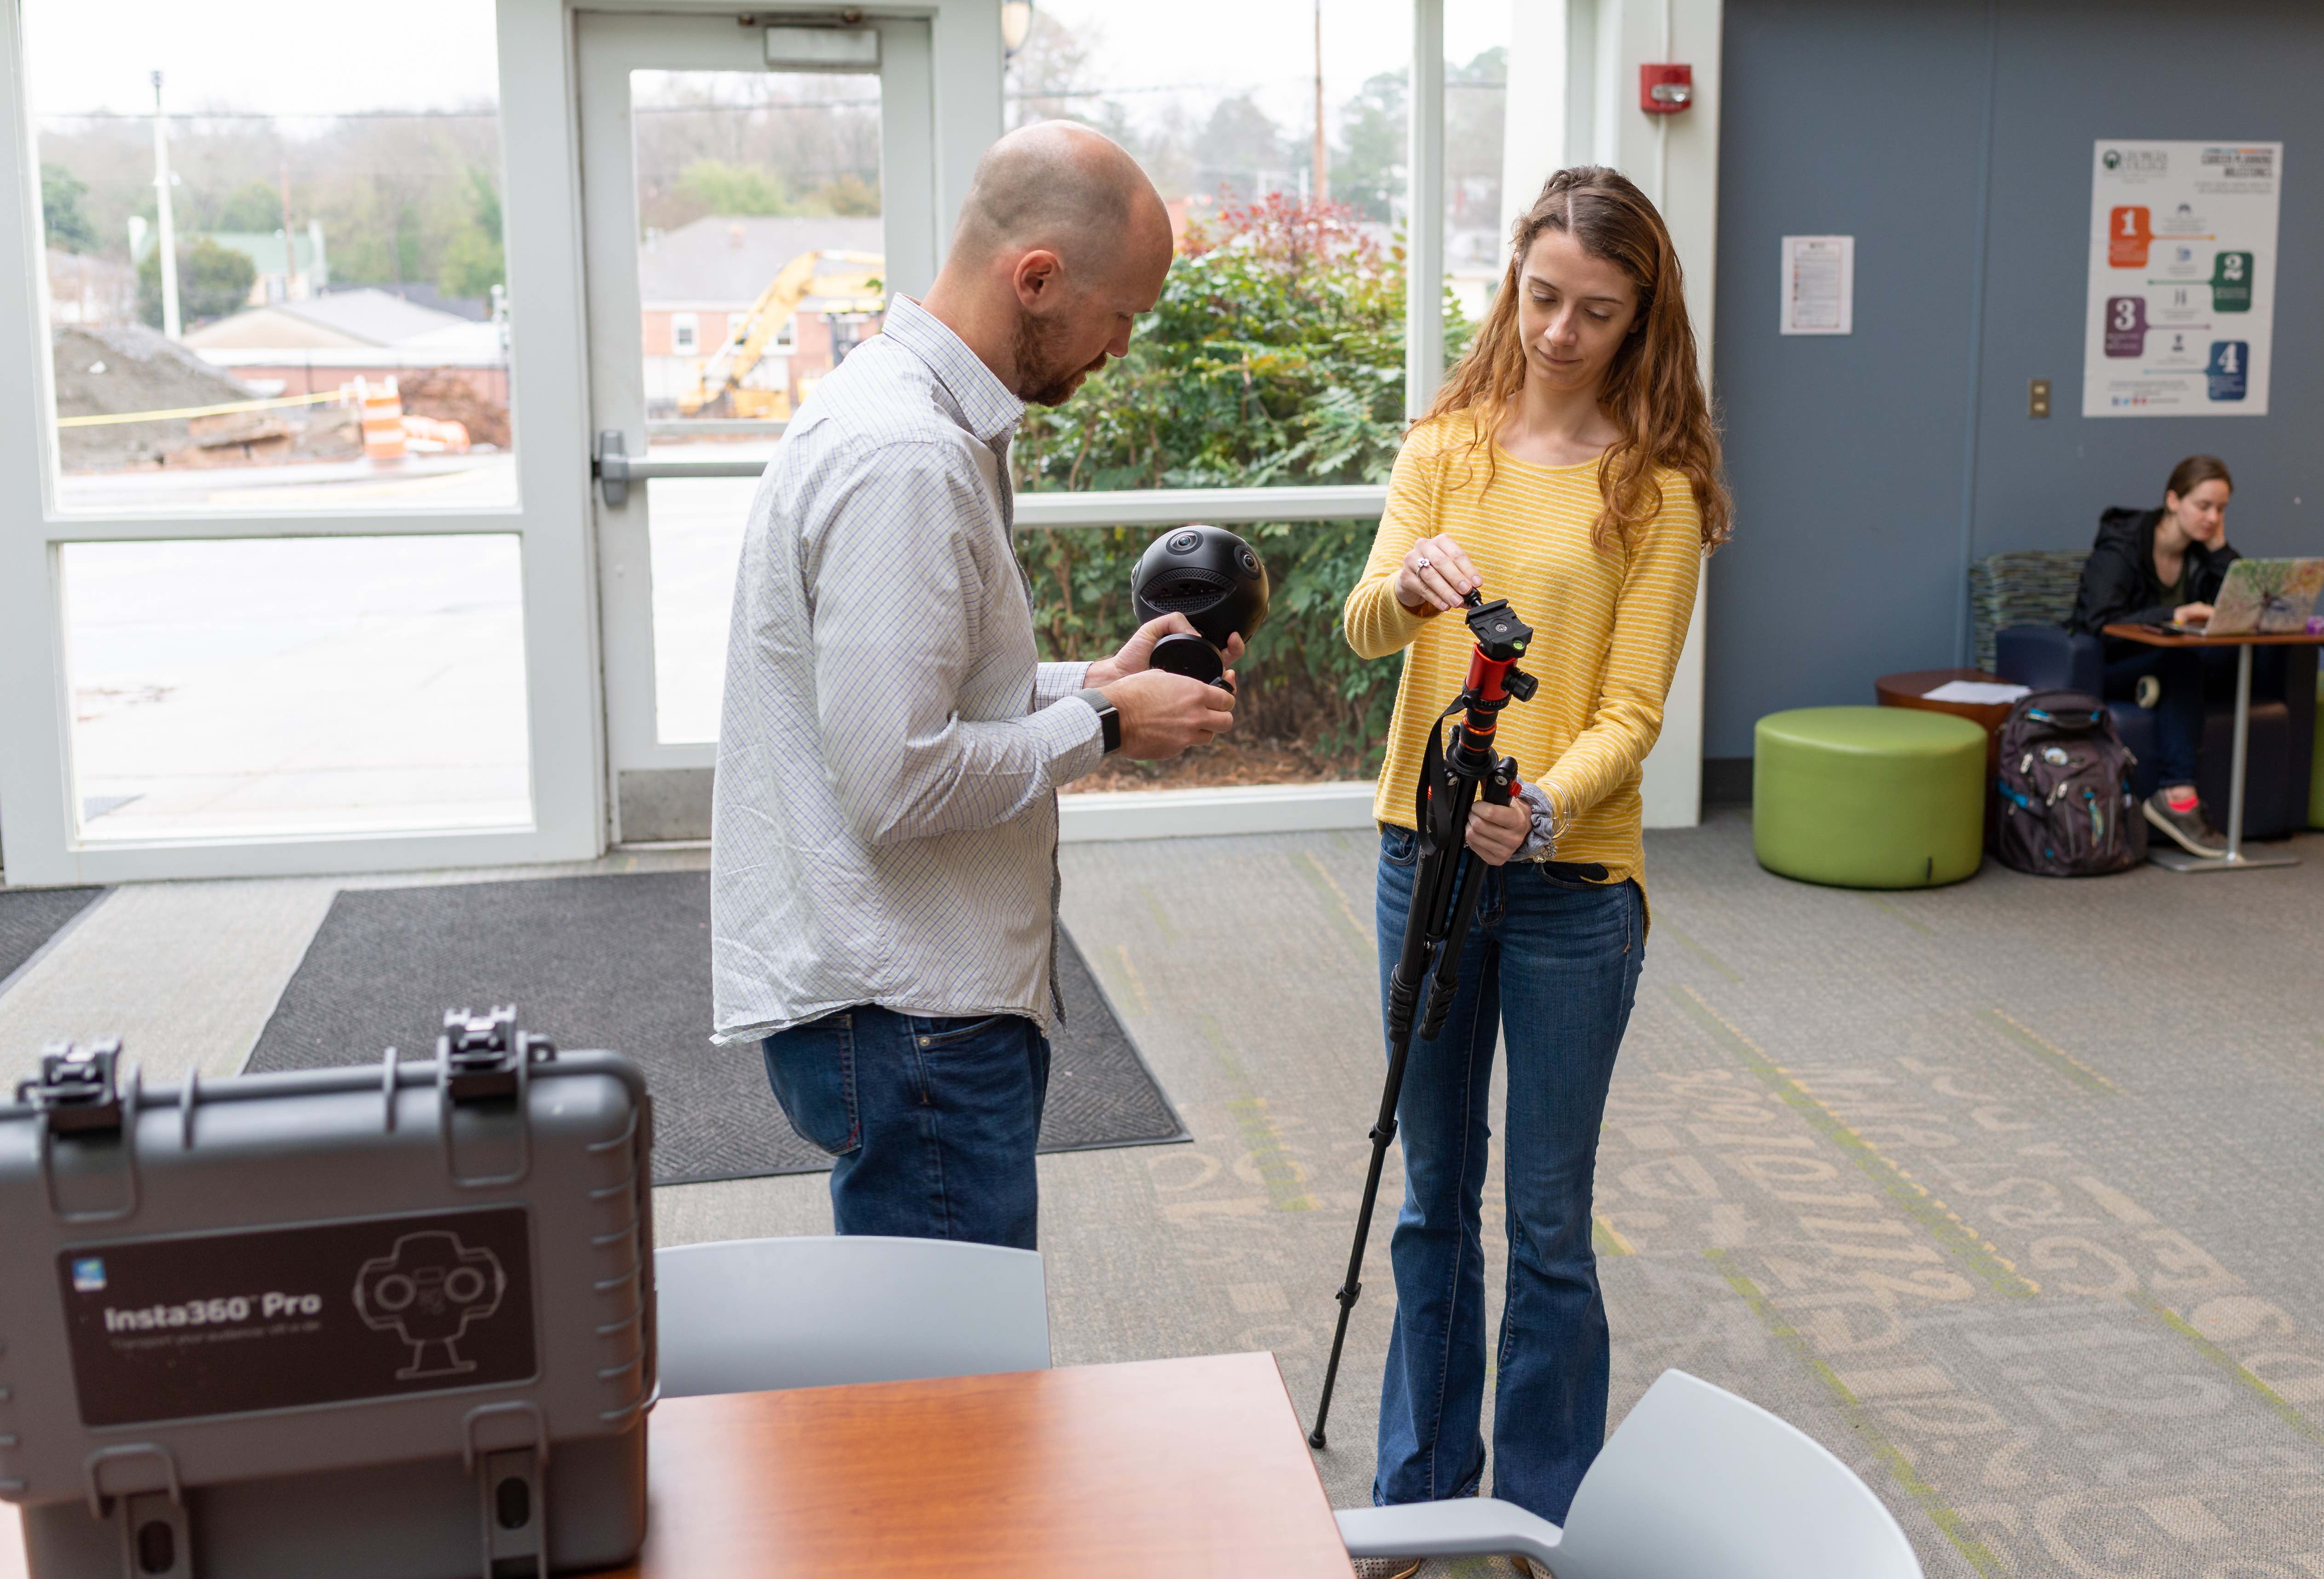 Dr. Chris Greer, professor of instructional technology at Georgia College, and graduate student Hannah Jones working with the 360-degree camera.